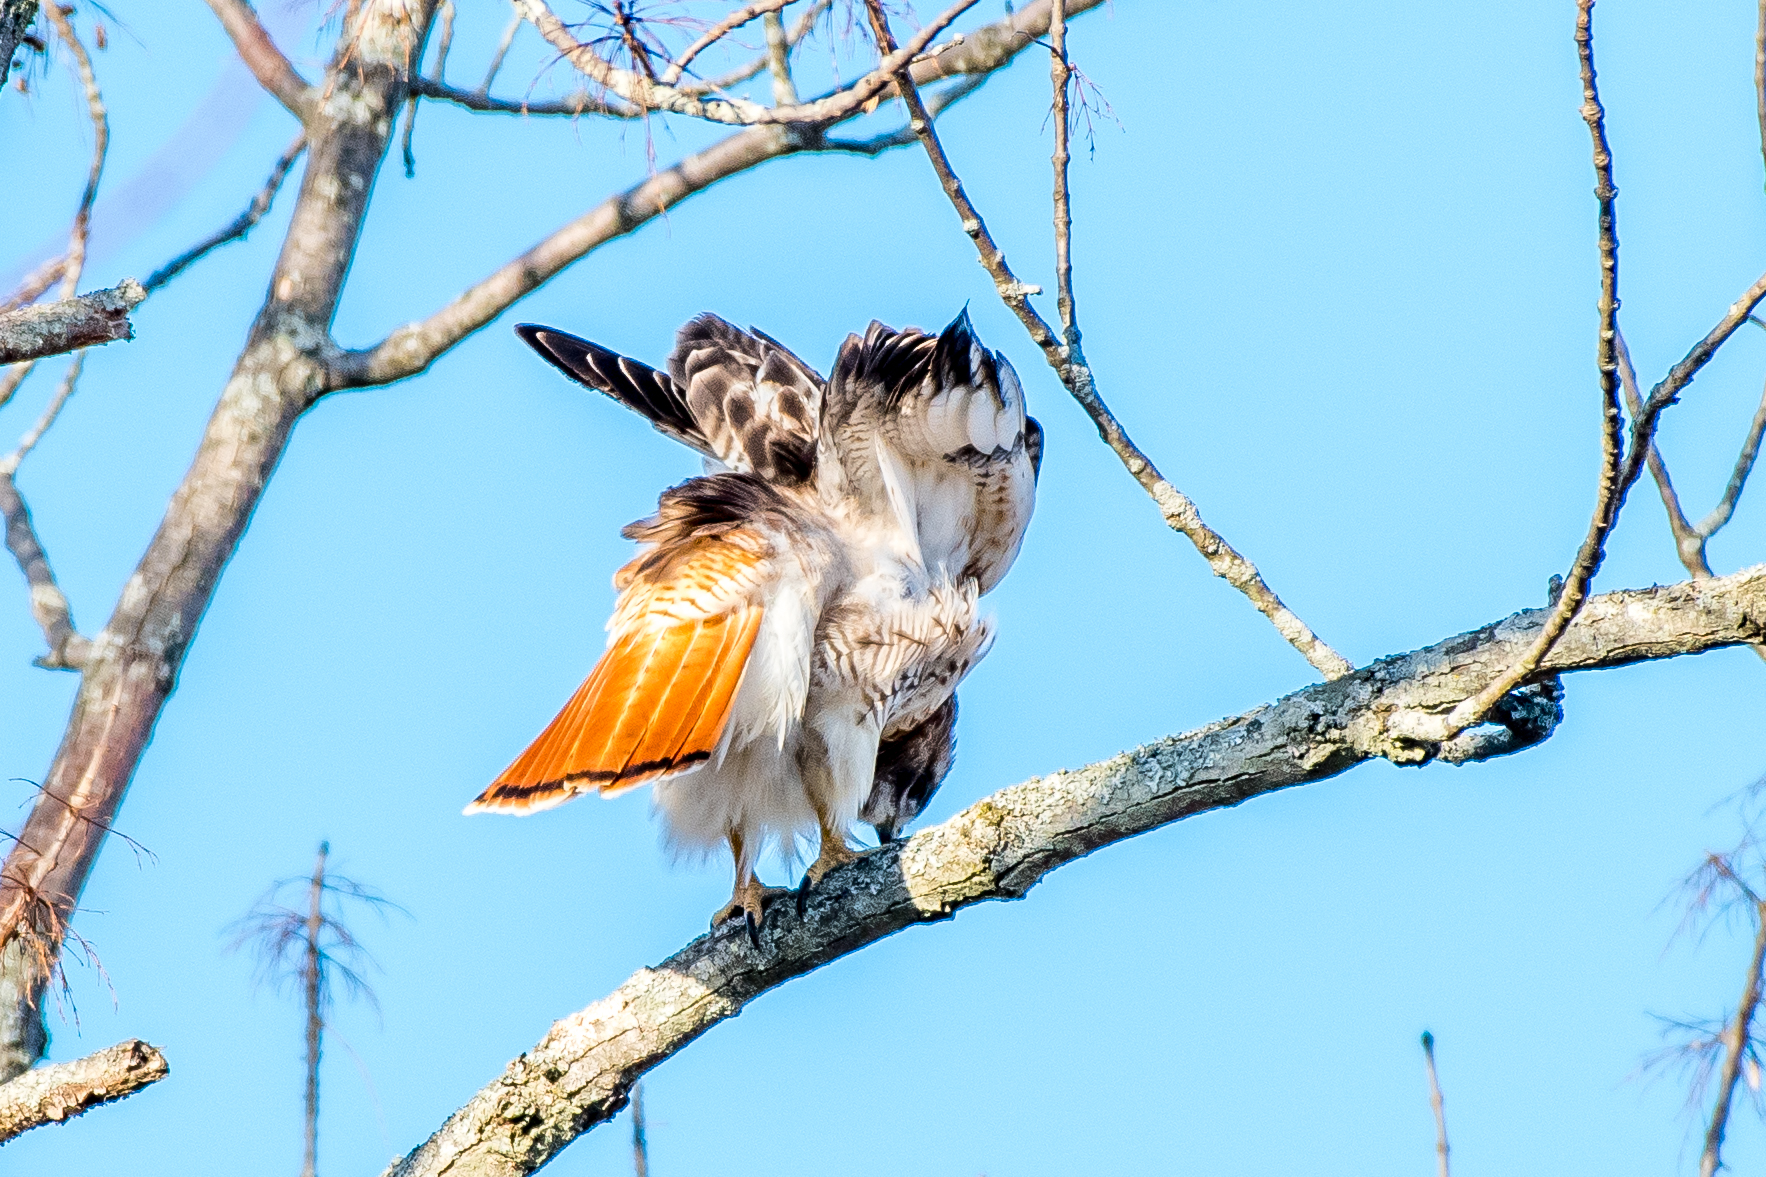   This great looking red tailed hawk was sitting in the sun this morning and preening away. &nbsp;When they finish they give a big shake to realign their feathers they have just preened &nbsp;2/2/16  